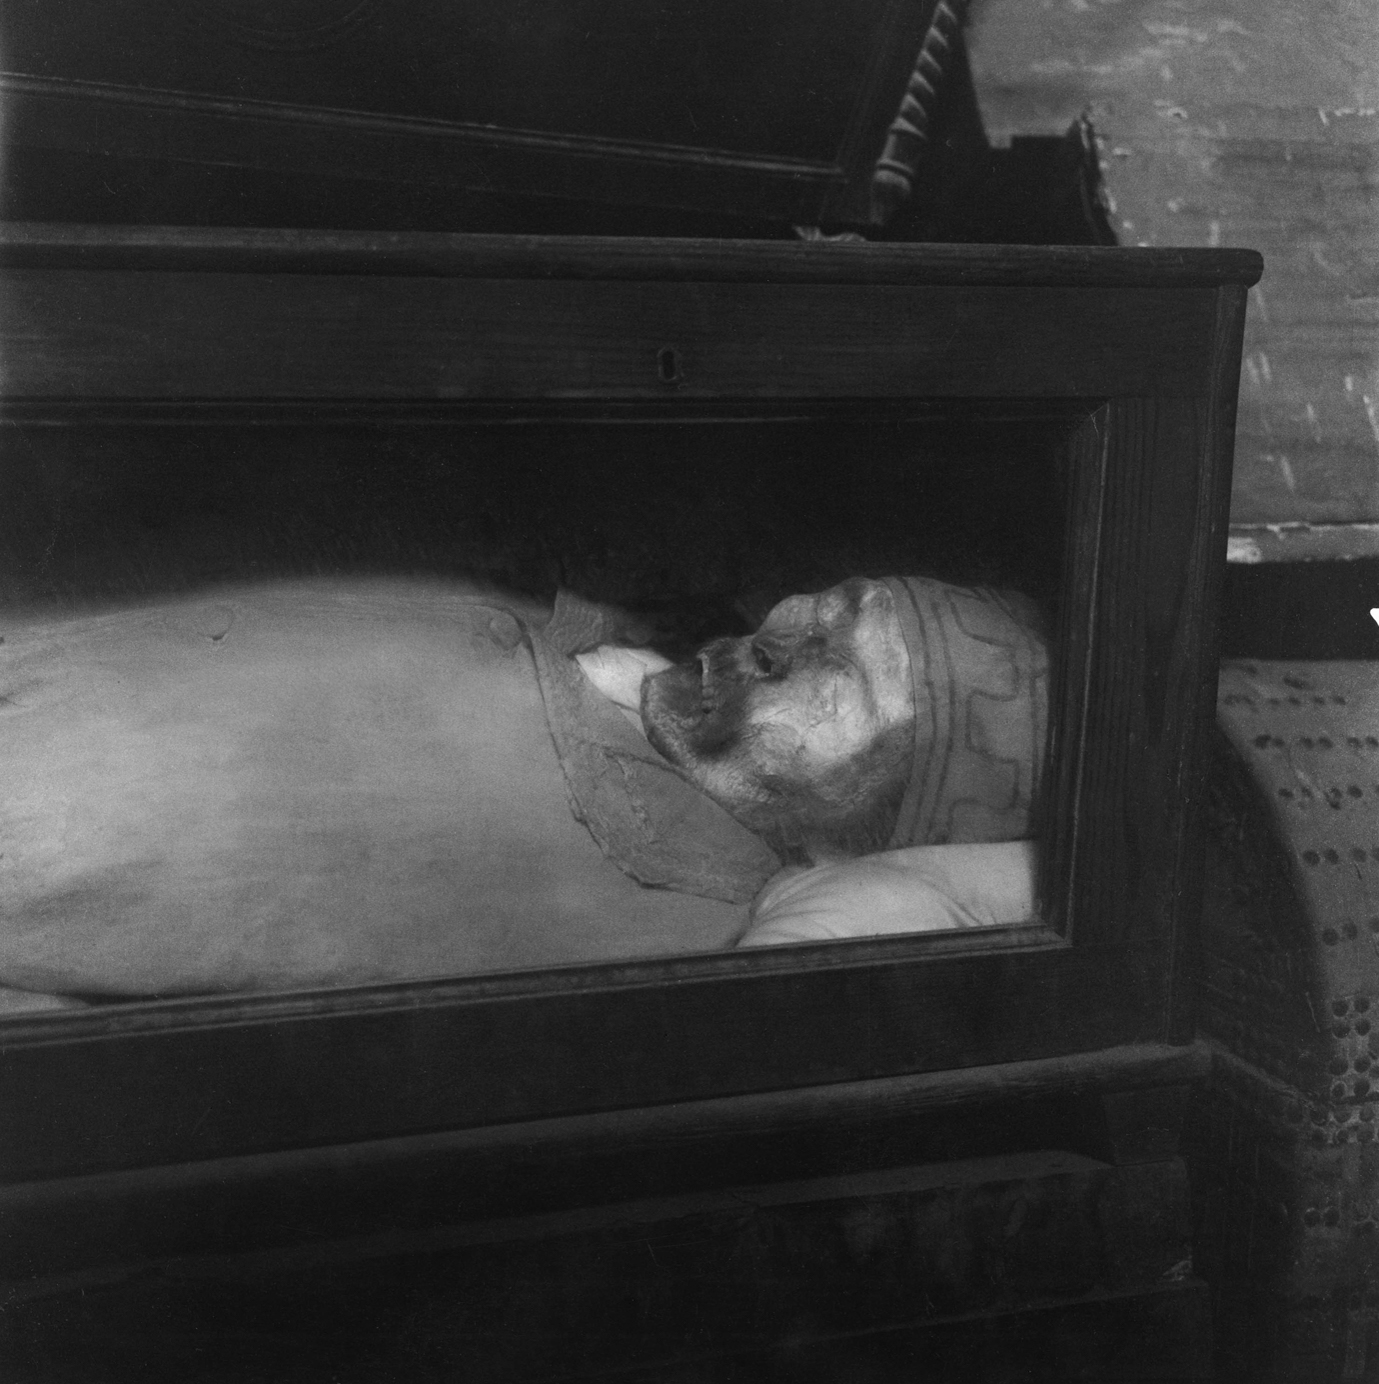 Black and white photograph of a corpse with a skullcap inside a coffin